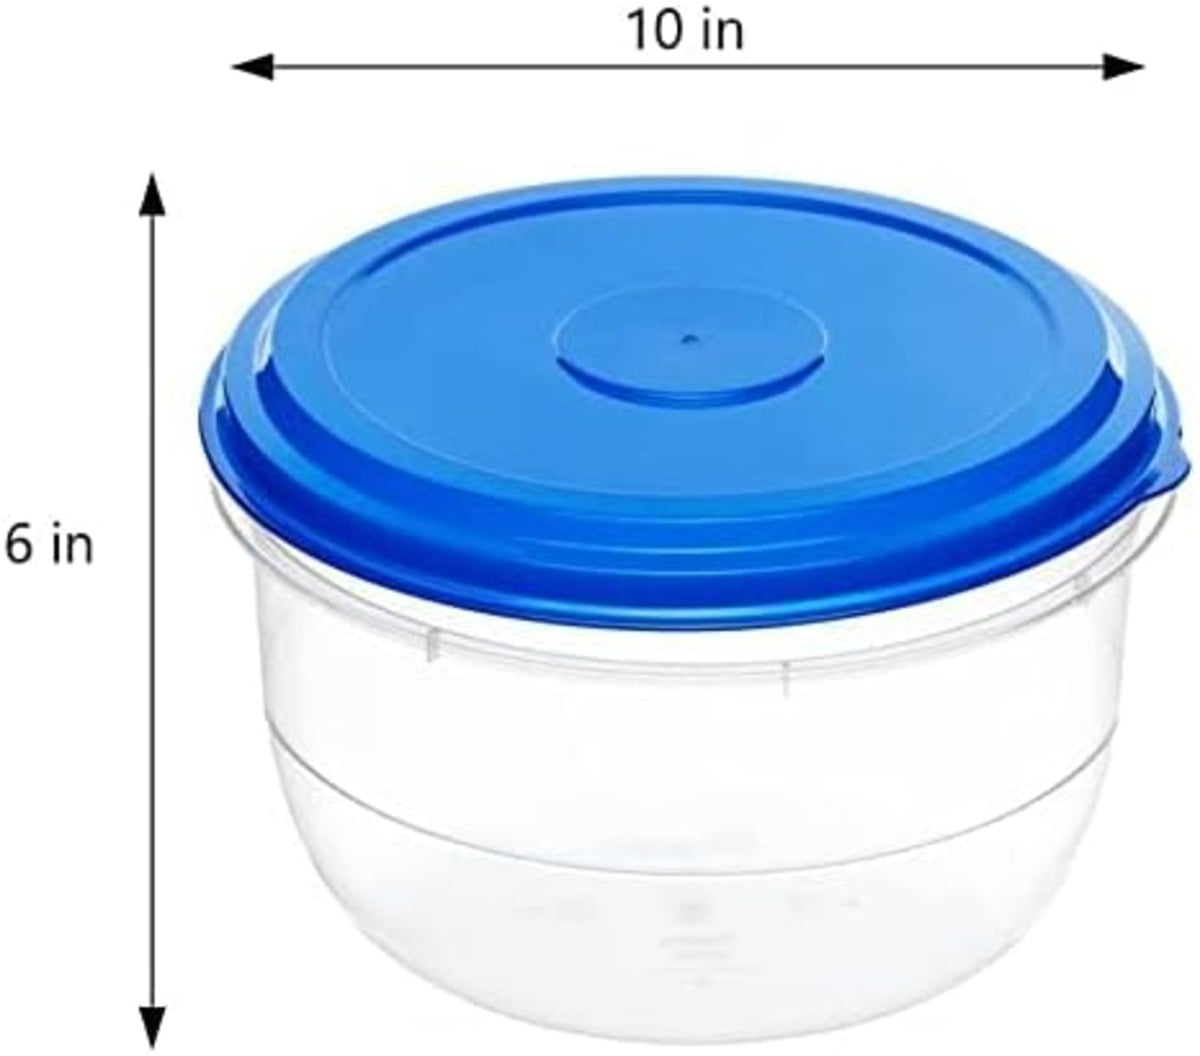  DecorRack Extra Large Food Storage Container with Lid, 7 Liter  capacity, Shatterproof, Reusable Mixing Bowl, Dry Food Container, Snack  Bowl, Store Leftovers, Ice Cream Bowl in Random Colors (1 Bowl): Home